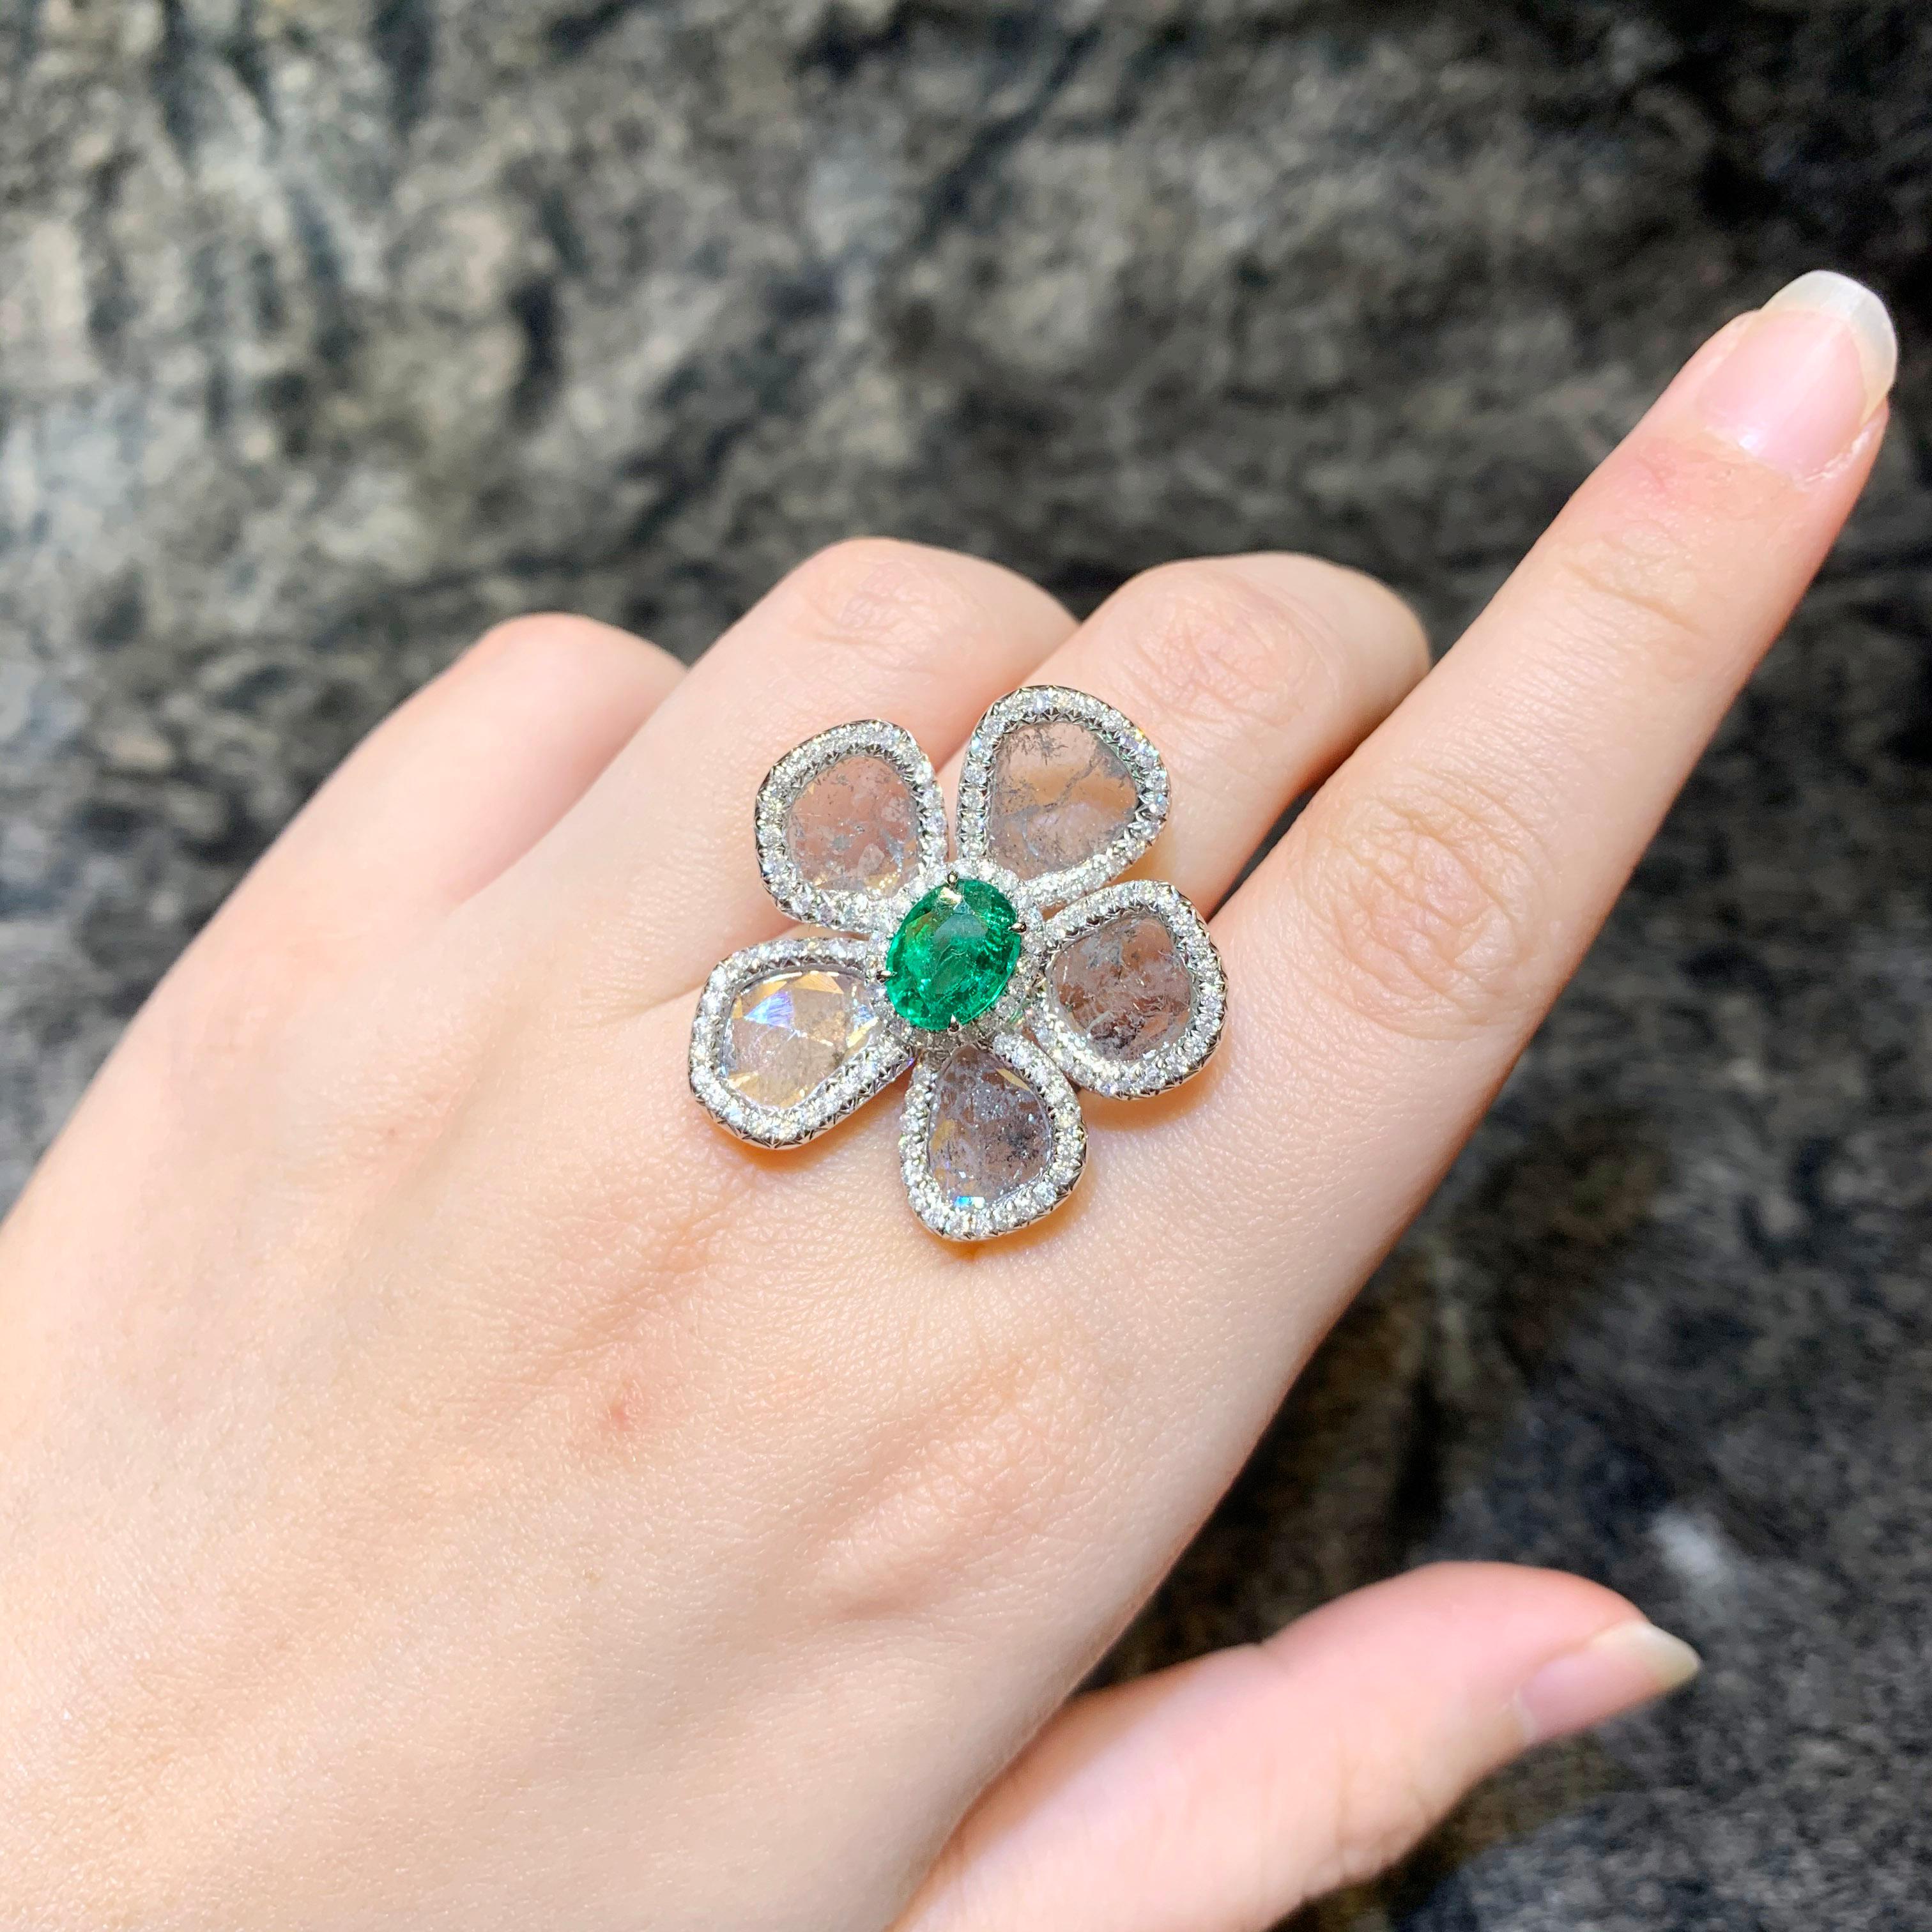 1.42 carat of Vivid Green Zambian Emerald is surrounded by 3.7 carat of Salt and Pepper Slice Diamond and 0.85 carat of white brilliant round diamond. 